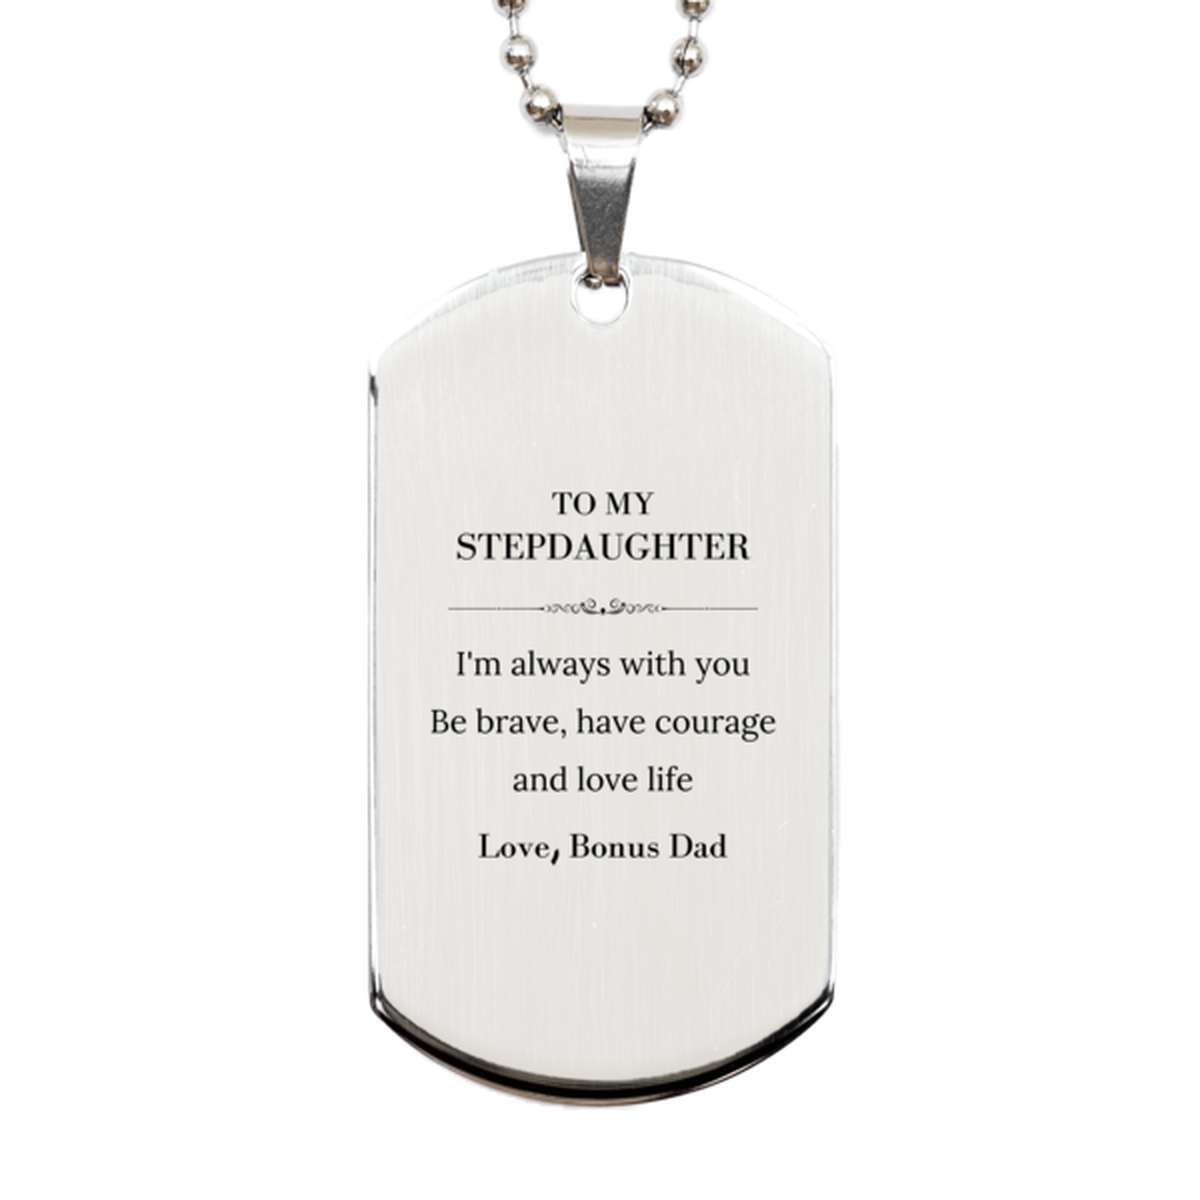 To My Stepdaughter Gifts from Bonus Dad, Unique Silver Dog Tag Inspirational Christmas Birthday Graduation Gifts for Stepdaughter I'm always with you. Be brave, have courage and love life. Love, Bonus Dad